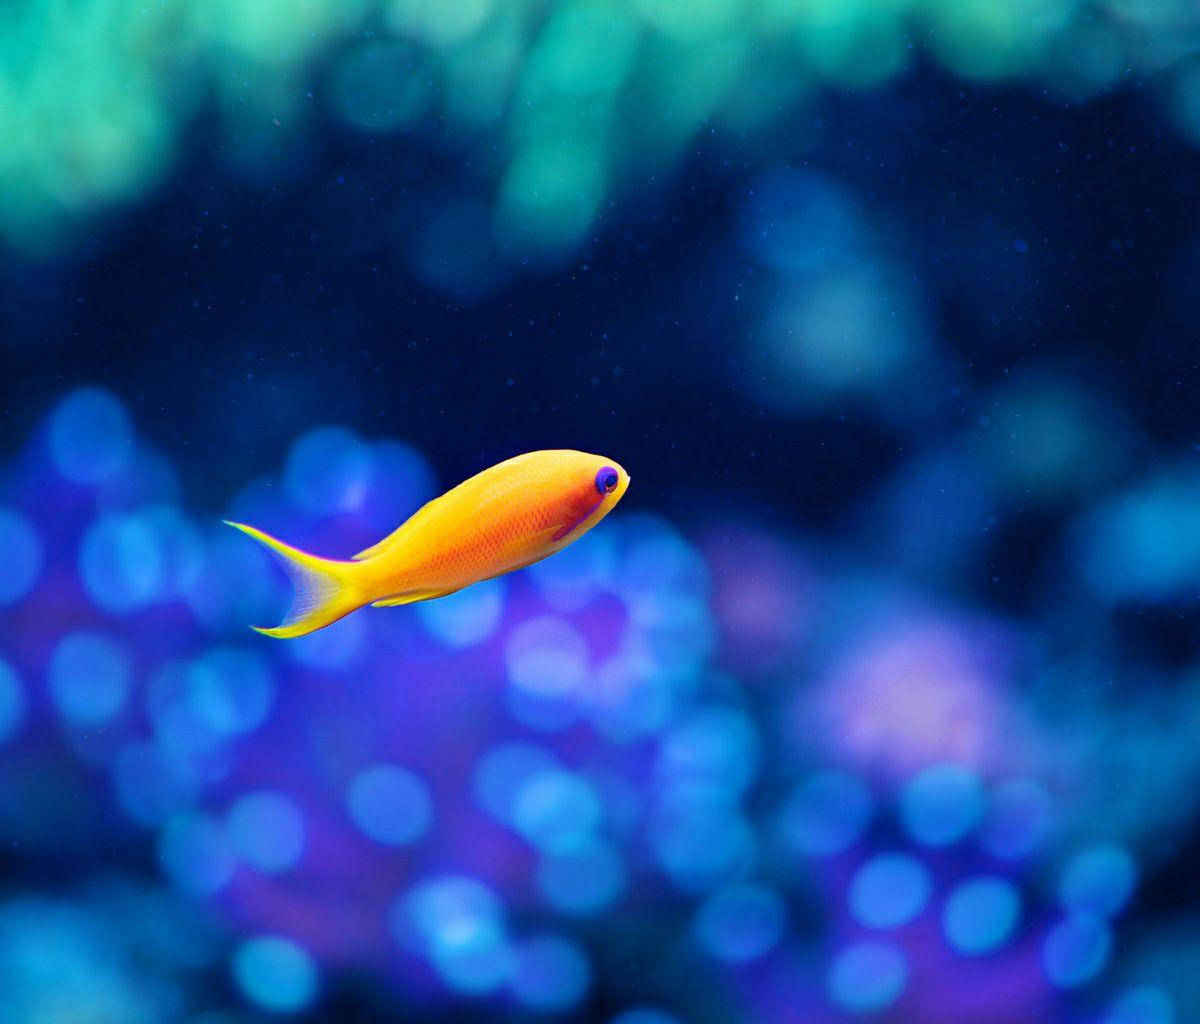 Free Fish Wallpaper Downloads, [900+] Fish Wallpapers for FREE | Wallpapers .com